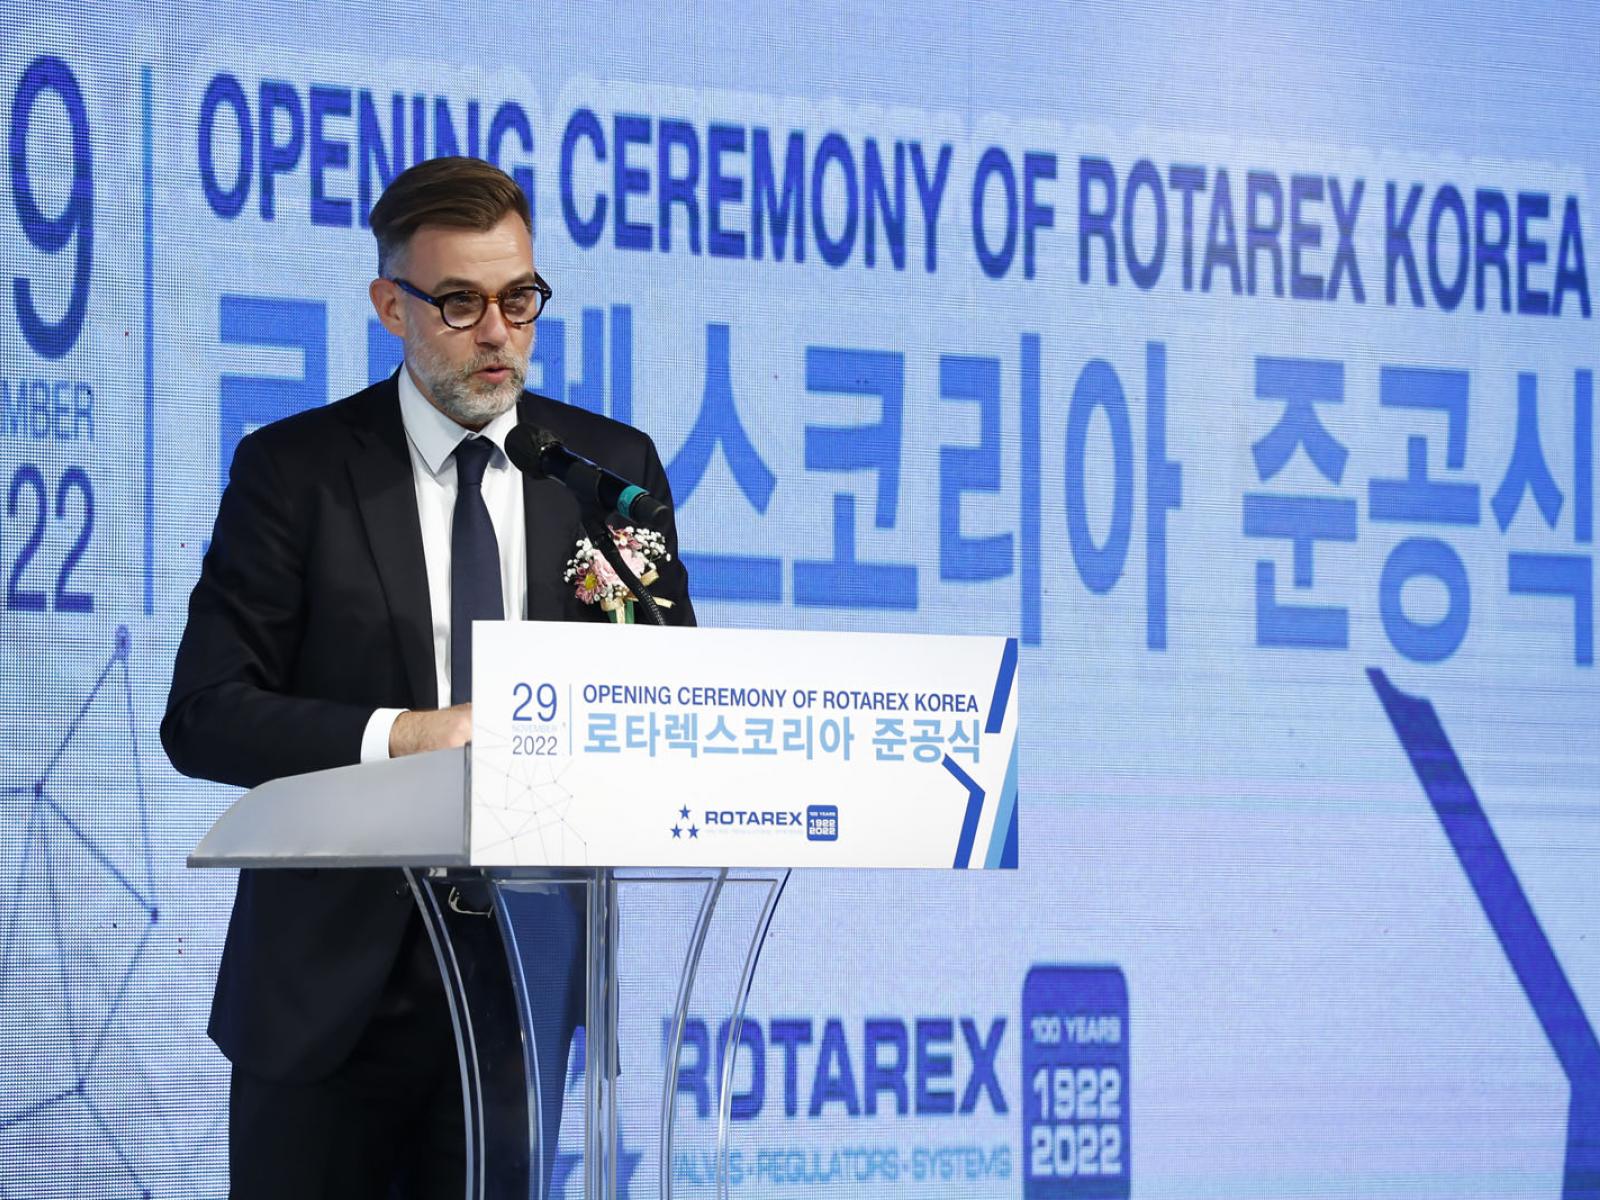 The Minister lays his speech during the opening ceremony the plant